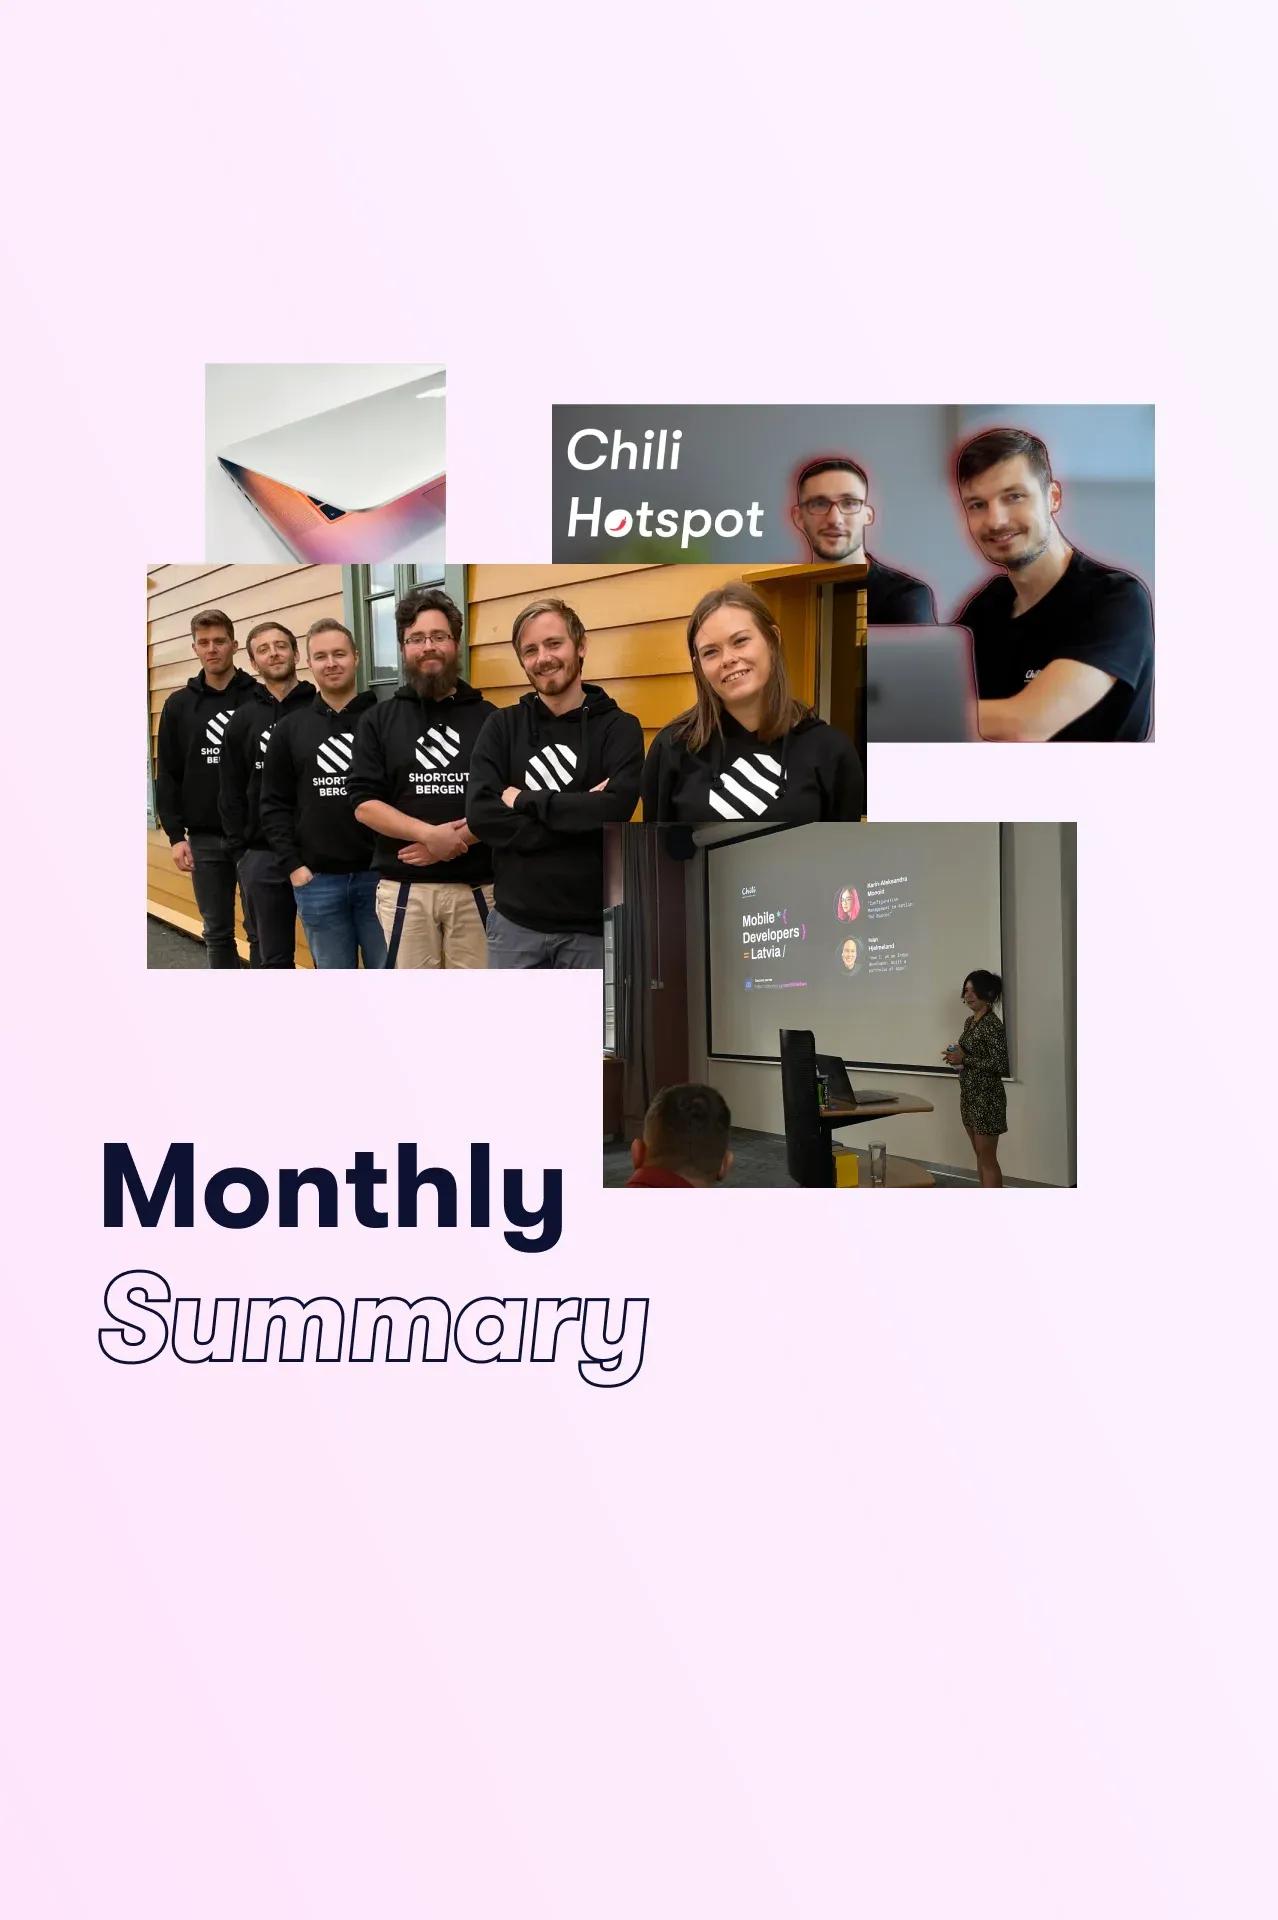 Monthly summary - August